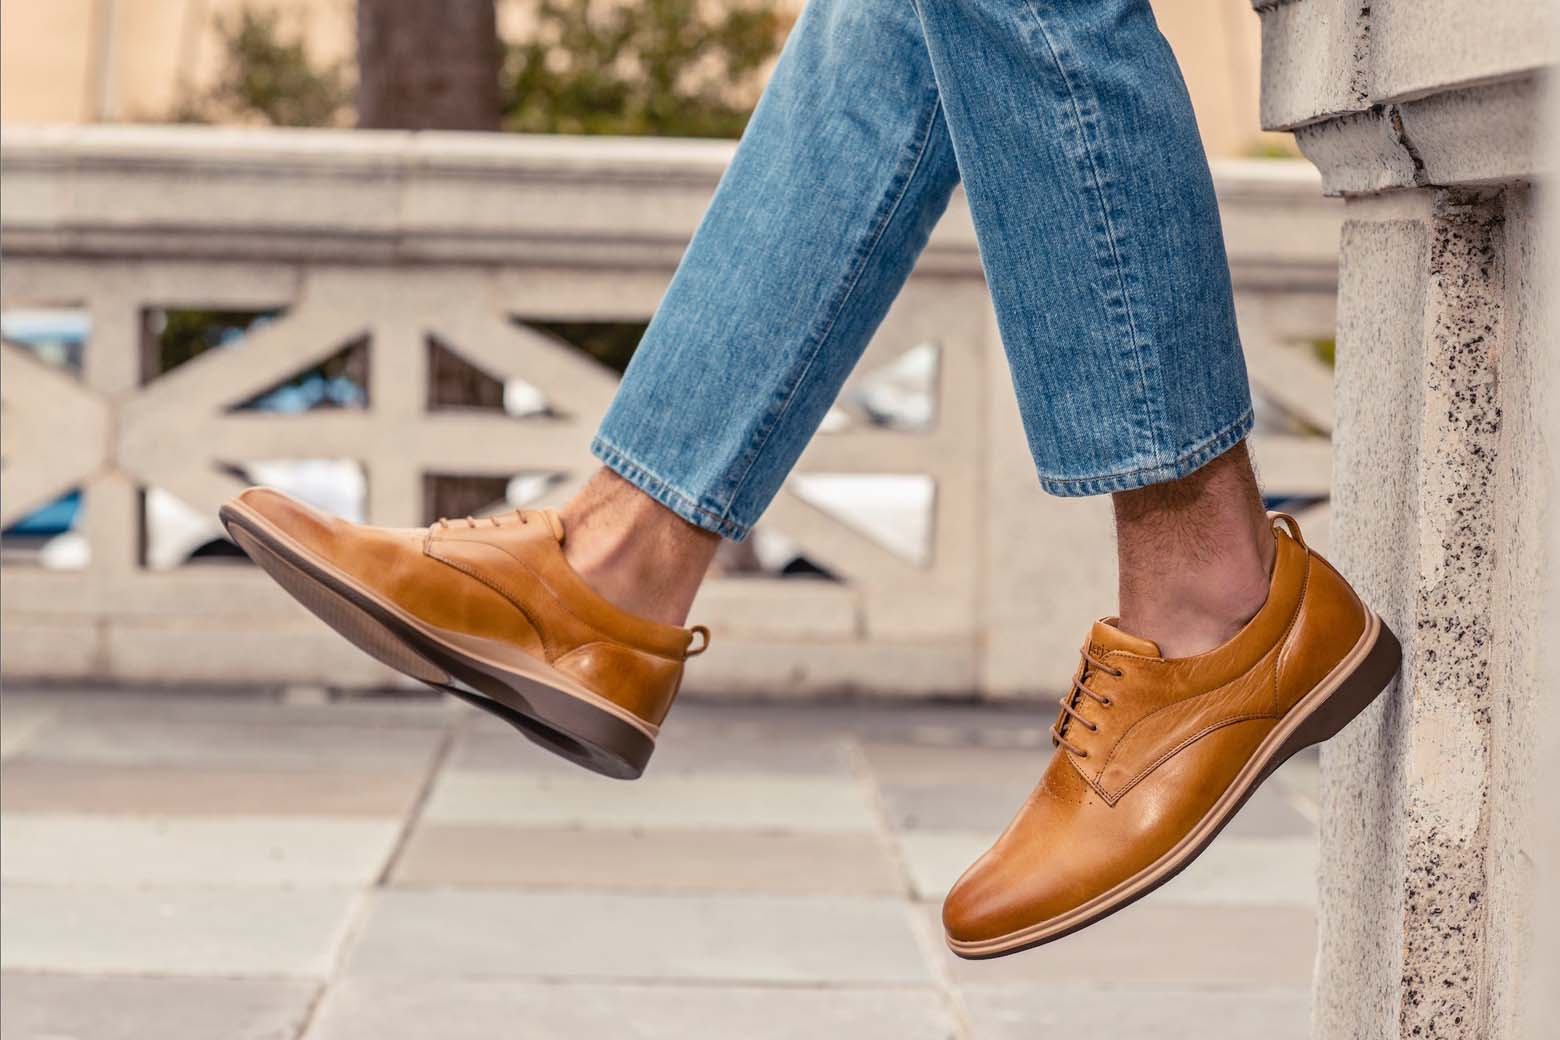 Amberjack Shoes: Stepping Into A New Era Of Men’s Dress Shoes